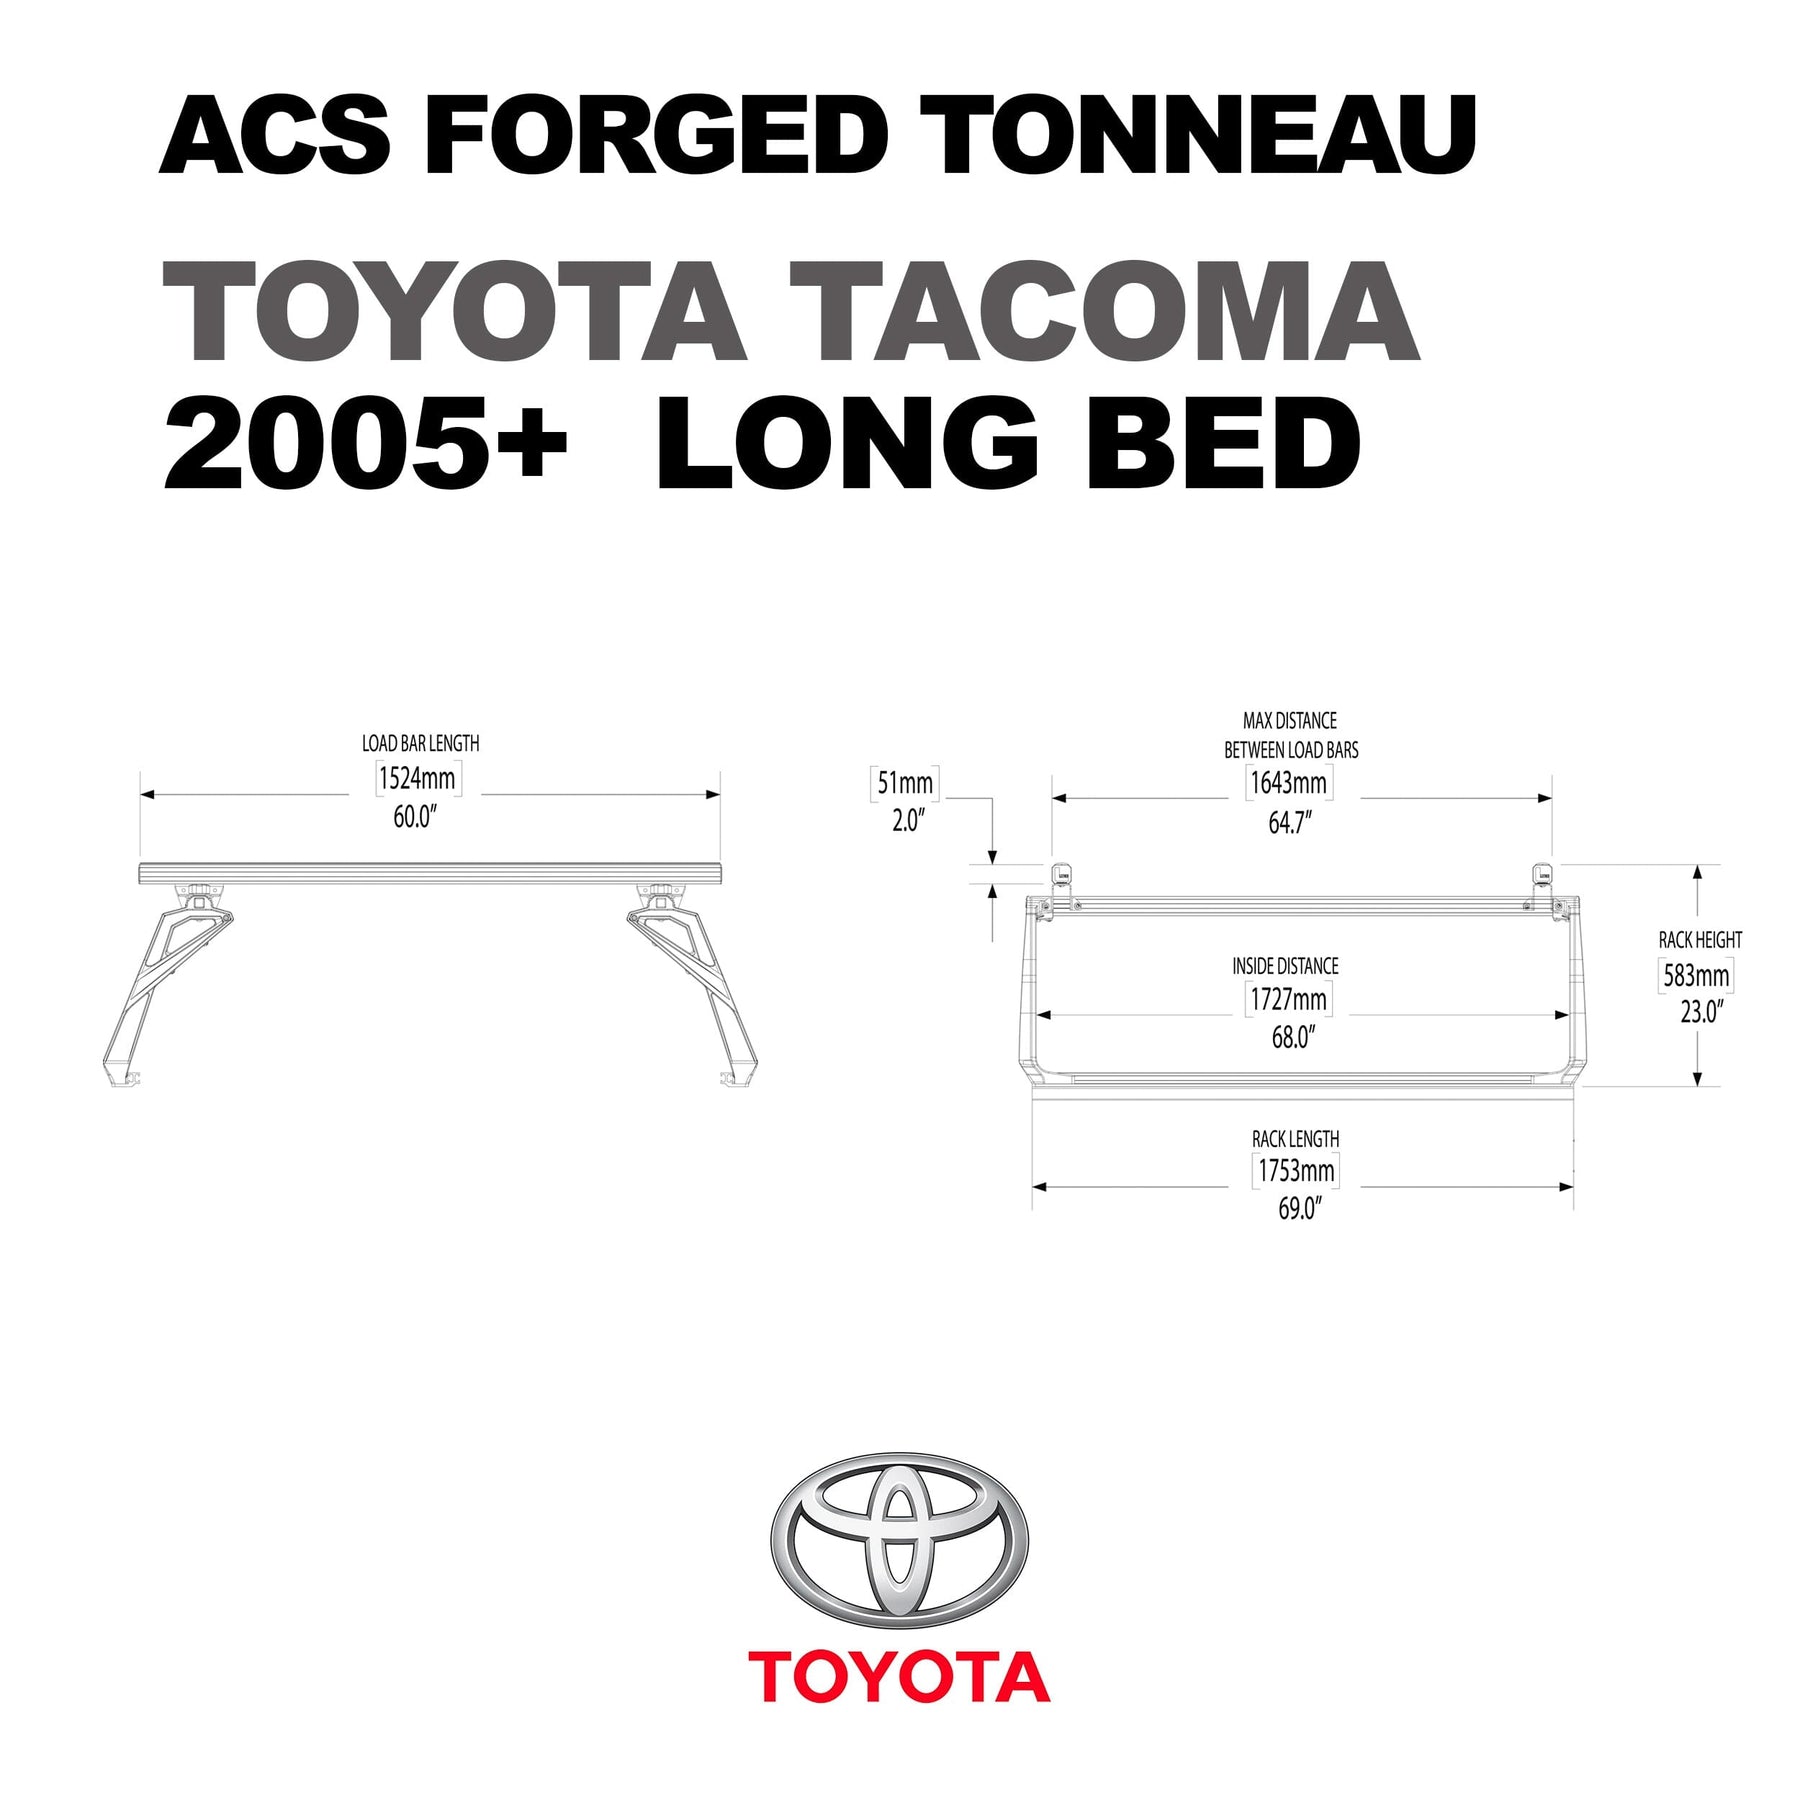 ACS Forged Tonneau - Rails Only - Toyota Toyota active-cargo-system Leitner Designs- Overland Kitted